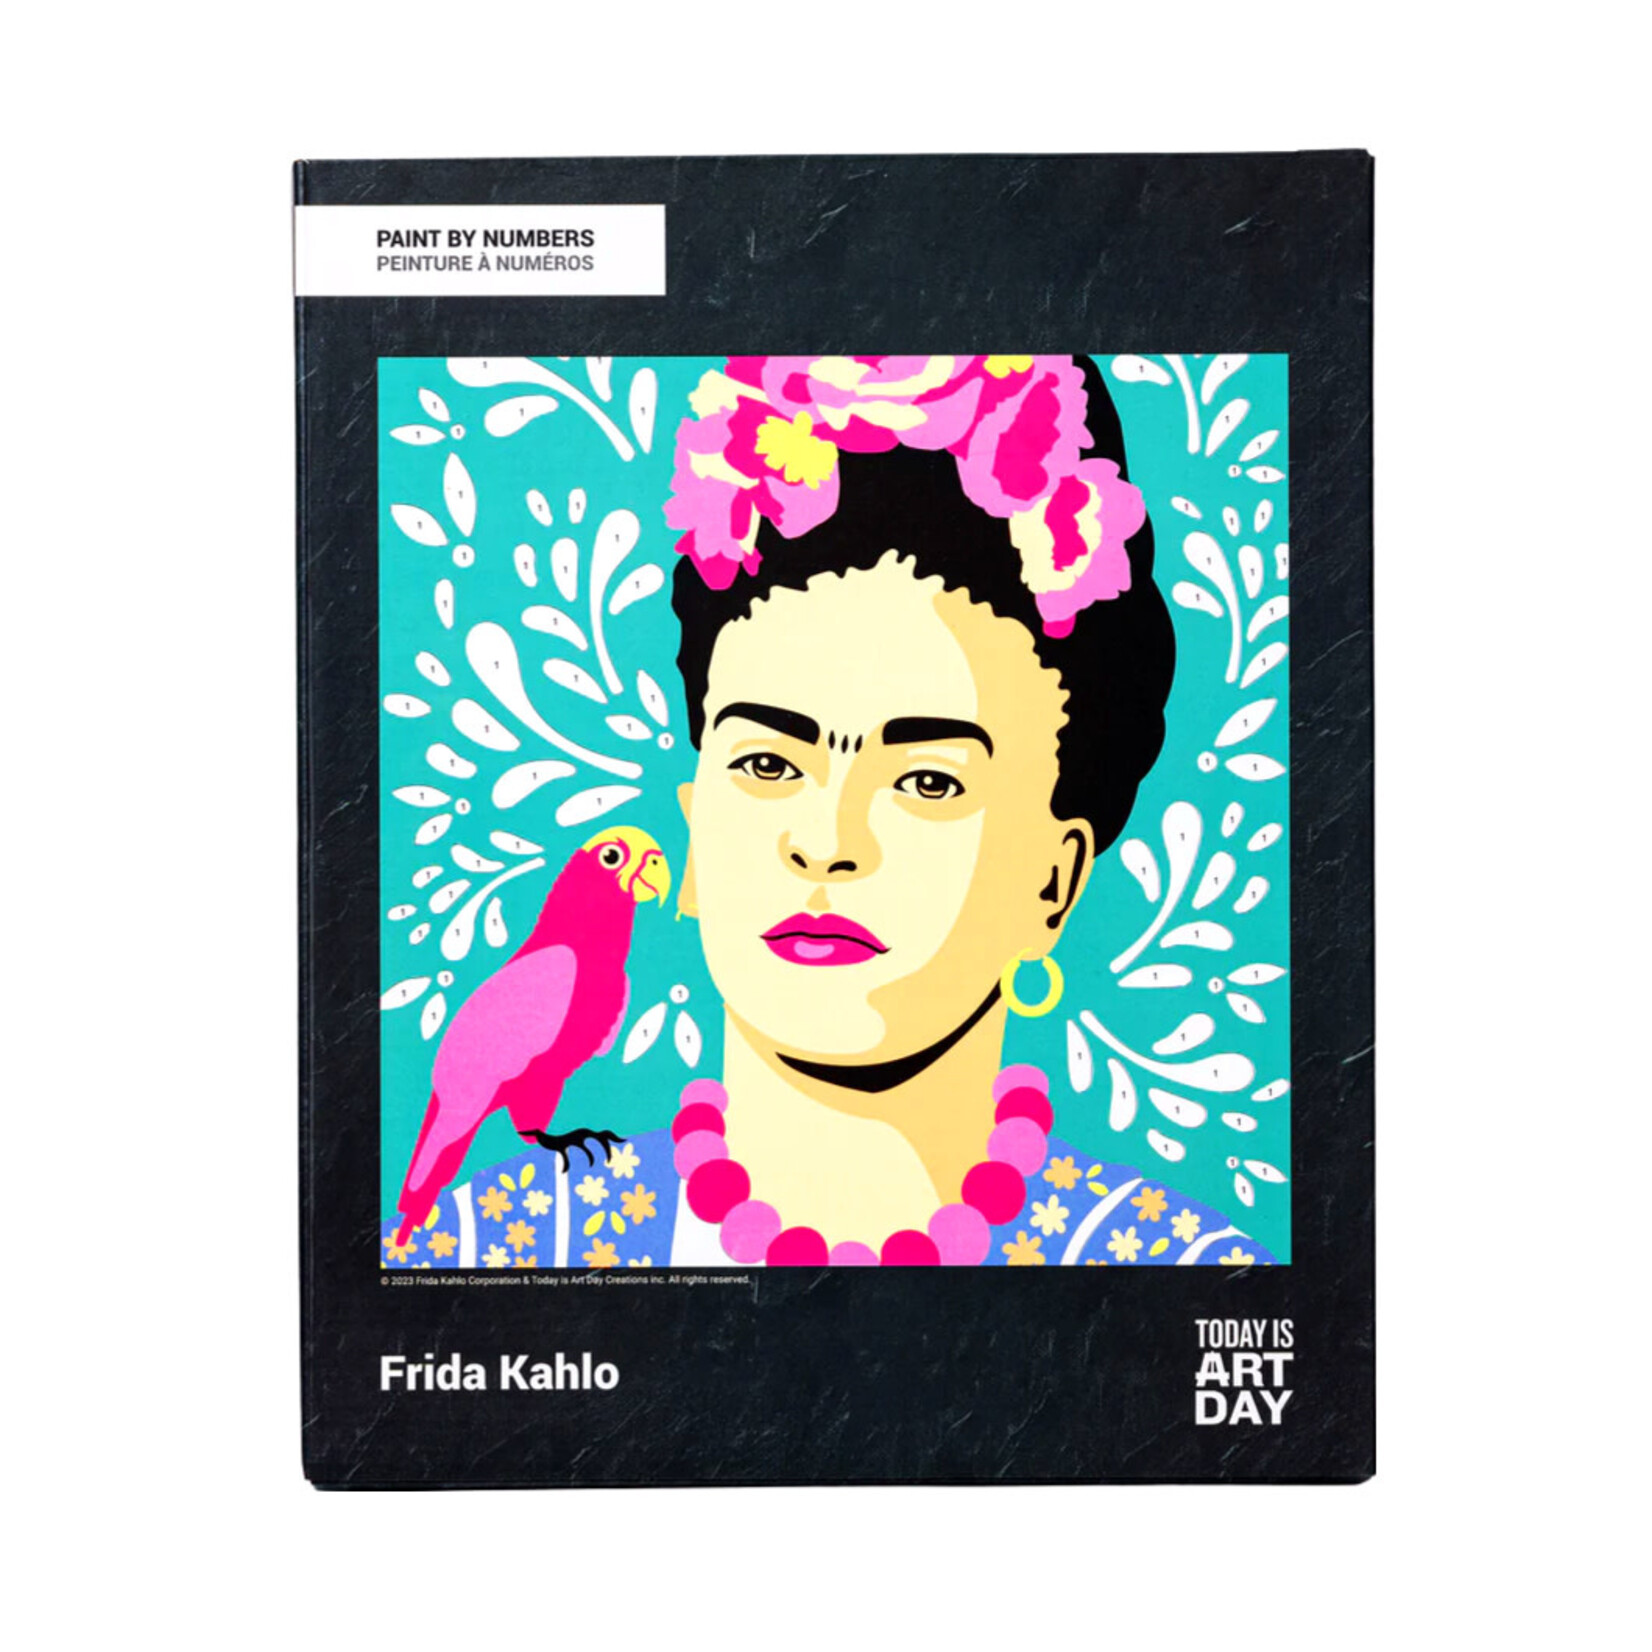 FAIRE (TODAY IS ART DAY) PAINT BY NUMBERS SELF PORTRAIT FRIDA